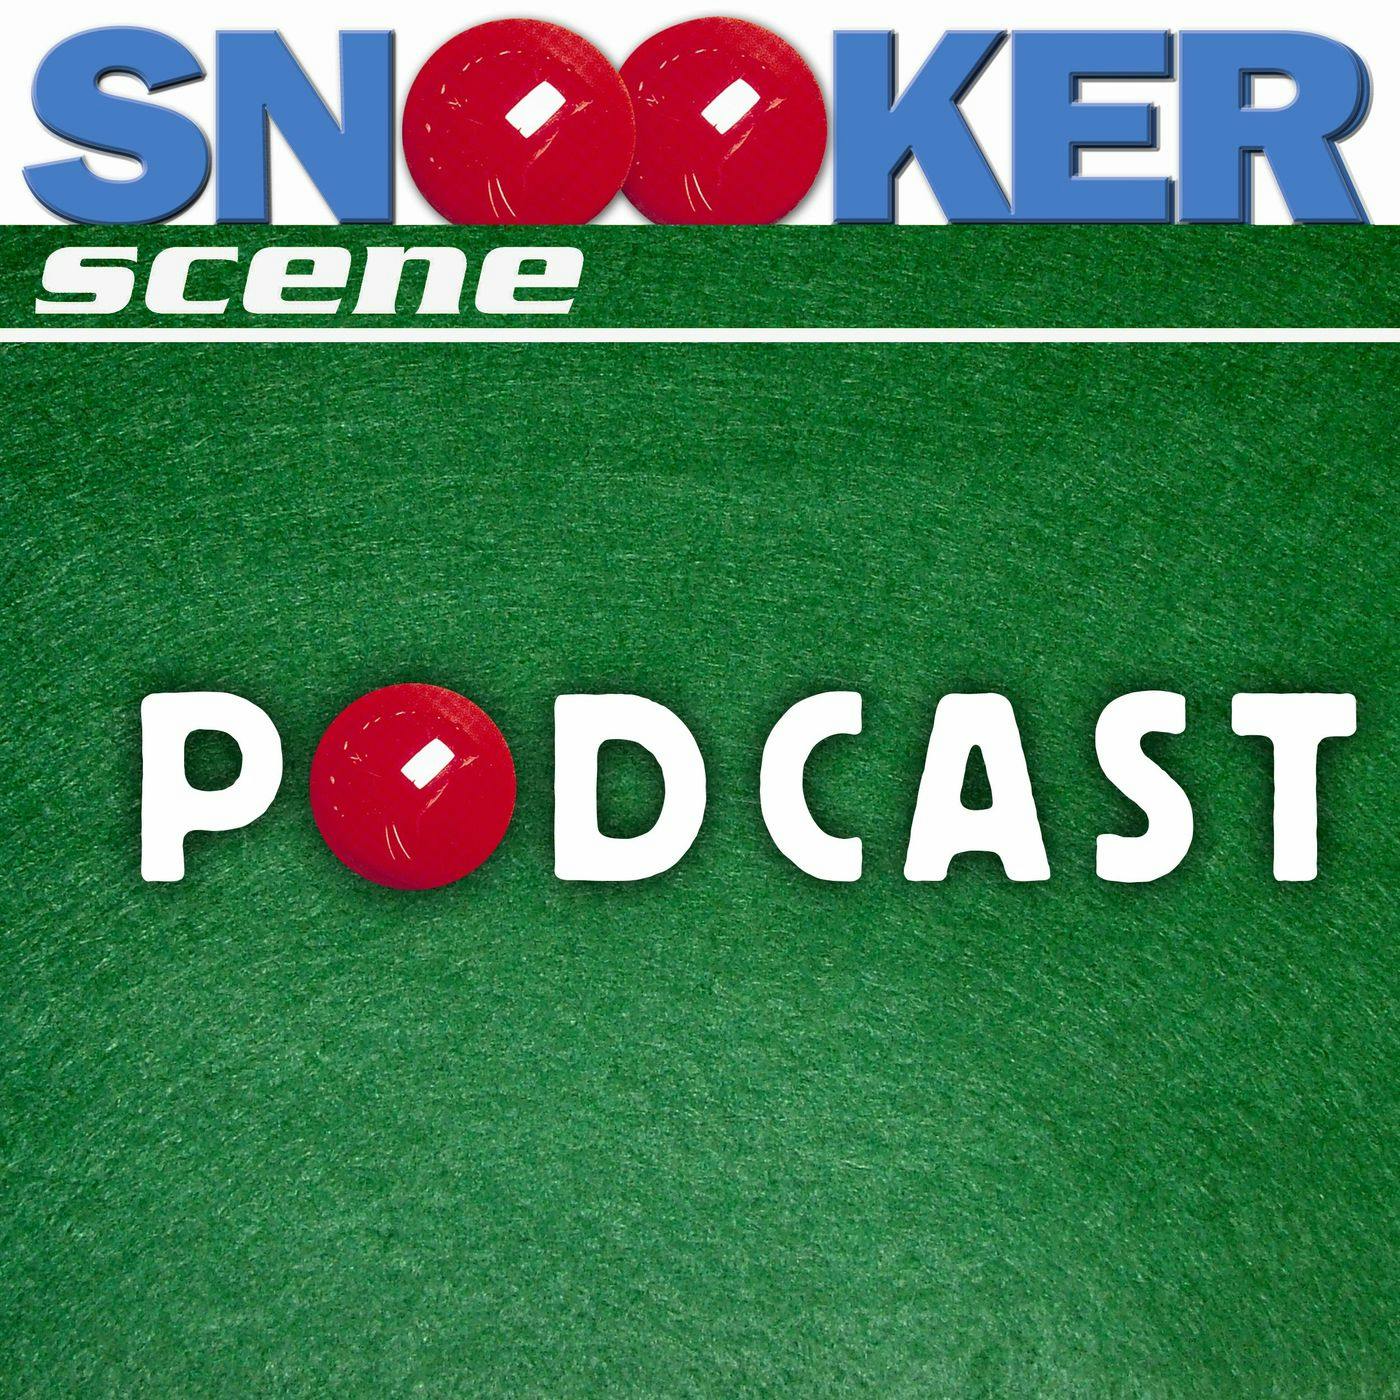 Snooker Scene Podcast episode 185 - Christmas Special!